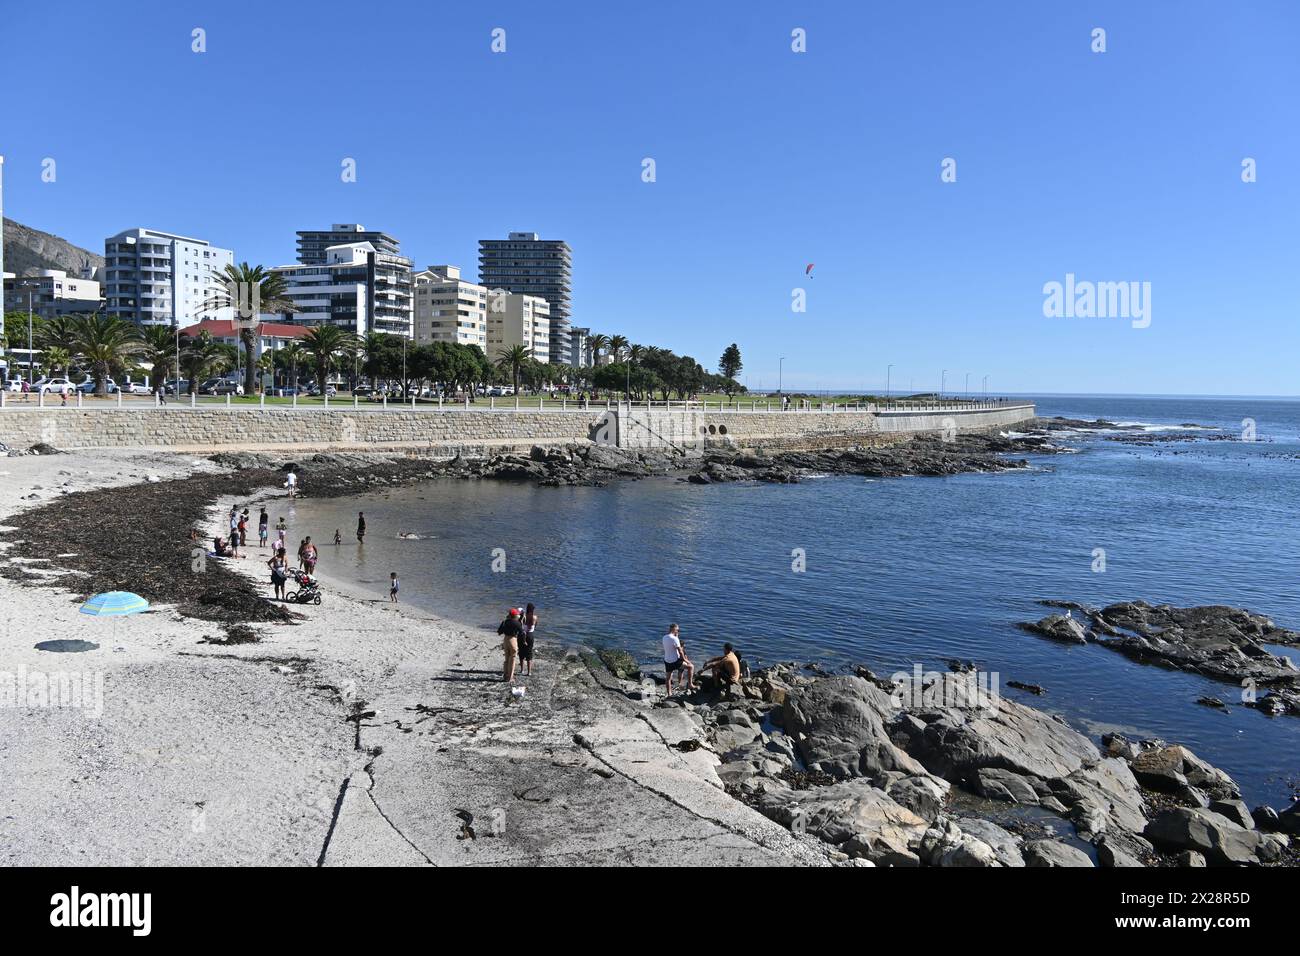 View of Sea Point waterfront, a neighbourhood situated between Signal Hill and the Atlantic Ocean in Cape Town, South Africa Stock Photo